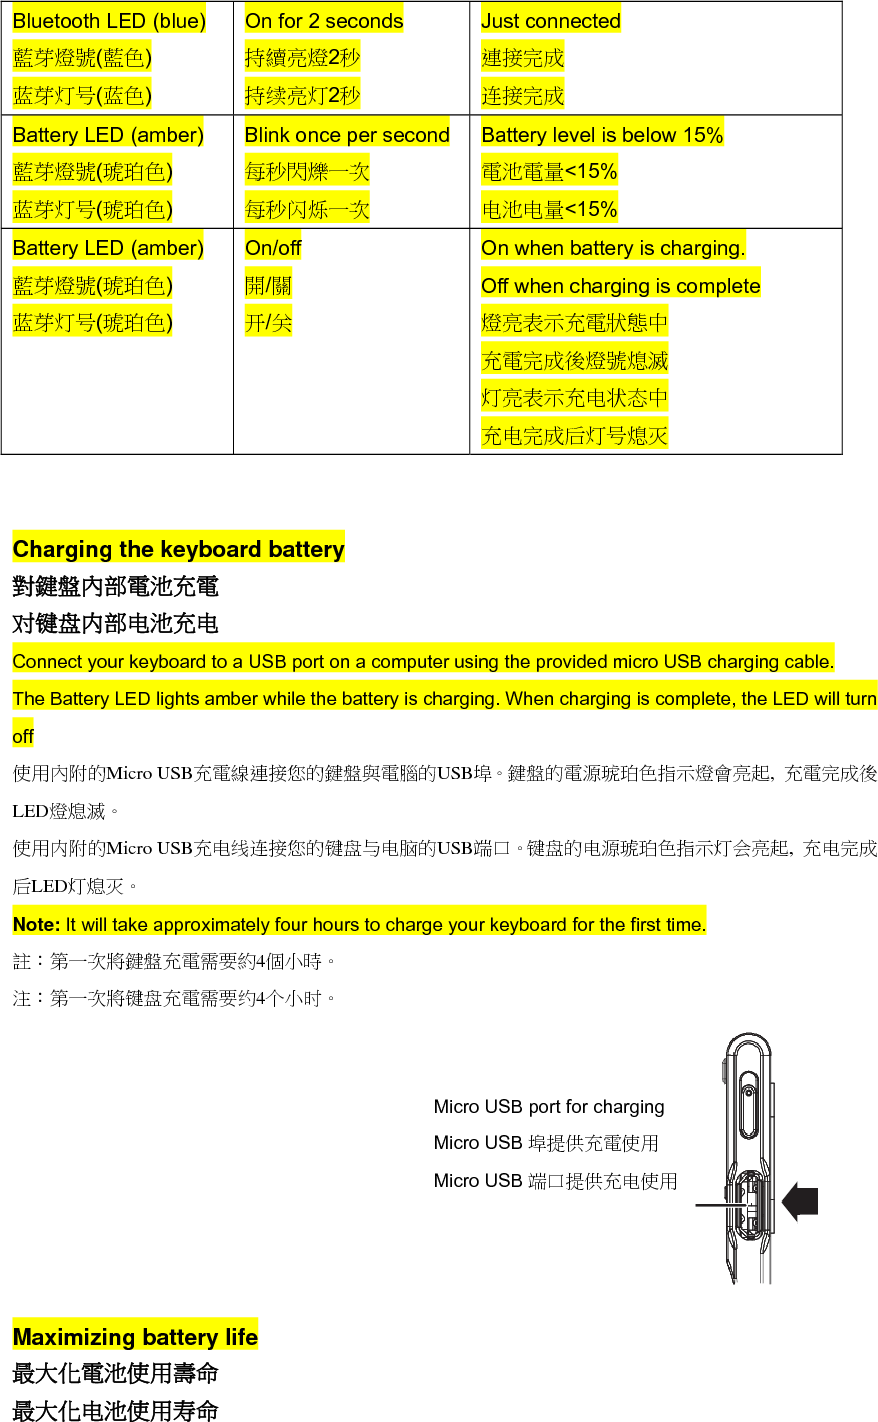  Your keyboard will go into sleep mode if it is idle for 2 hours. To maximize battery life, turn off your keyboard when you are not using it. 您的鍵盤閒置 2小時後進入睡眠模式。為了延長電池壽命，當你不需使用它時請關掉你的鍵盤電源。 您的键盘閒置 2小时后进入睡眠模式。为了延长电池寿命，当你不需使用它时请关掉你的键盘电源。 